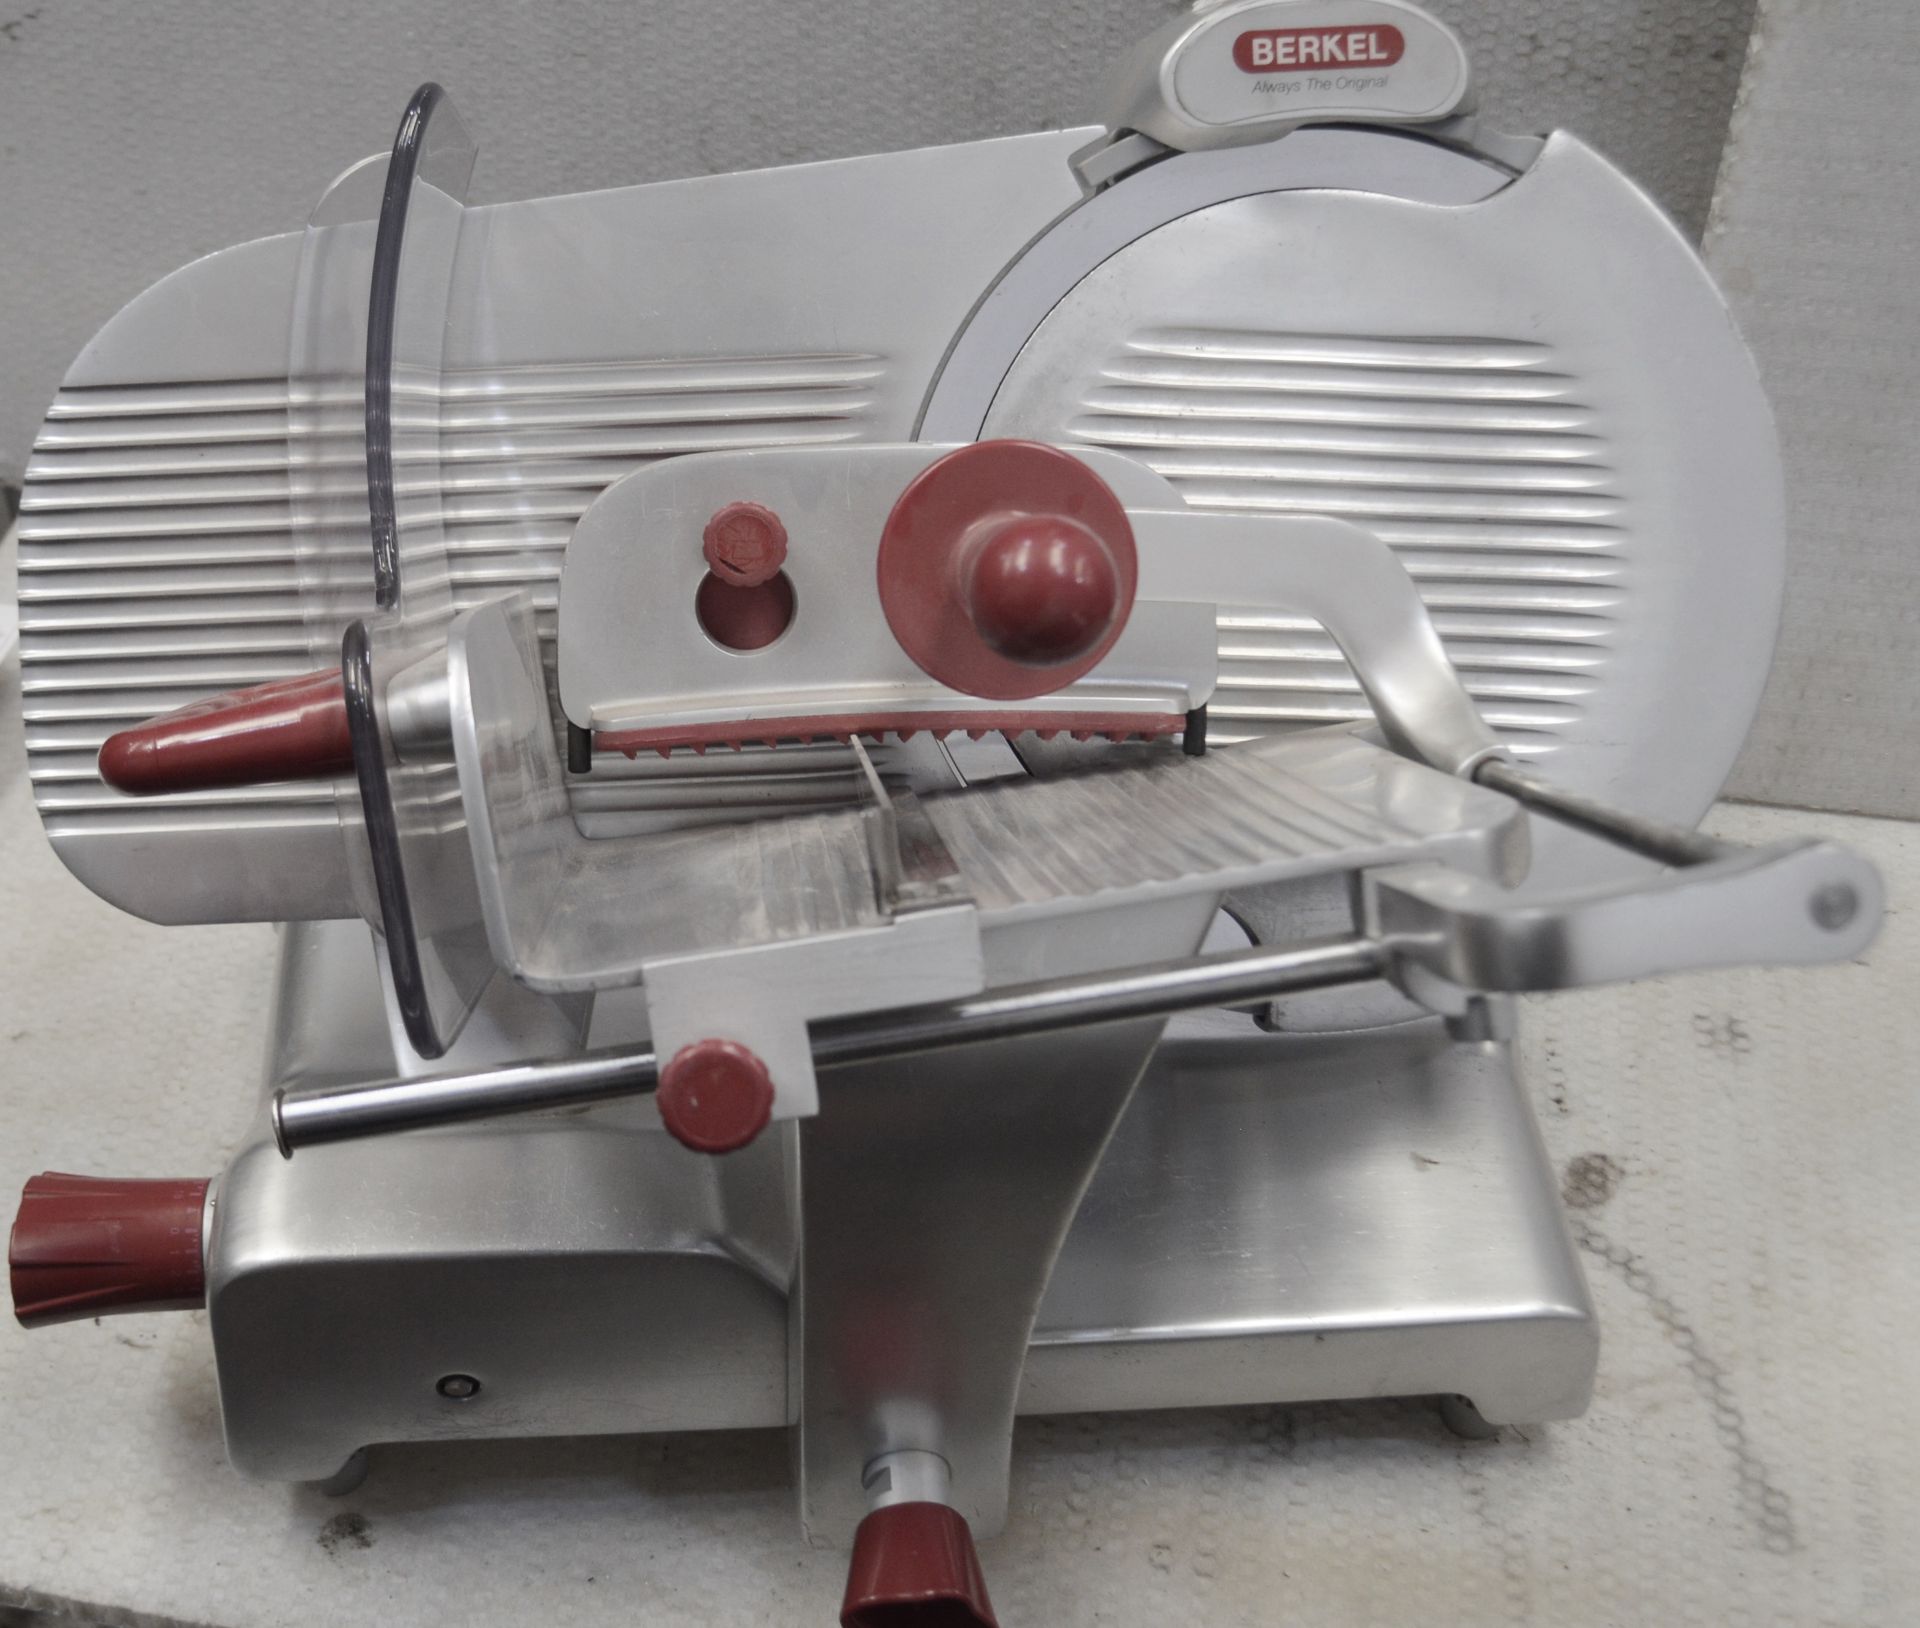 1 x Berkel 12" Commercial Cooked Meat / Bacon Slicer - 220-240v - Model BSPGL04011A0F - Approx - Image 2 of 4